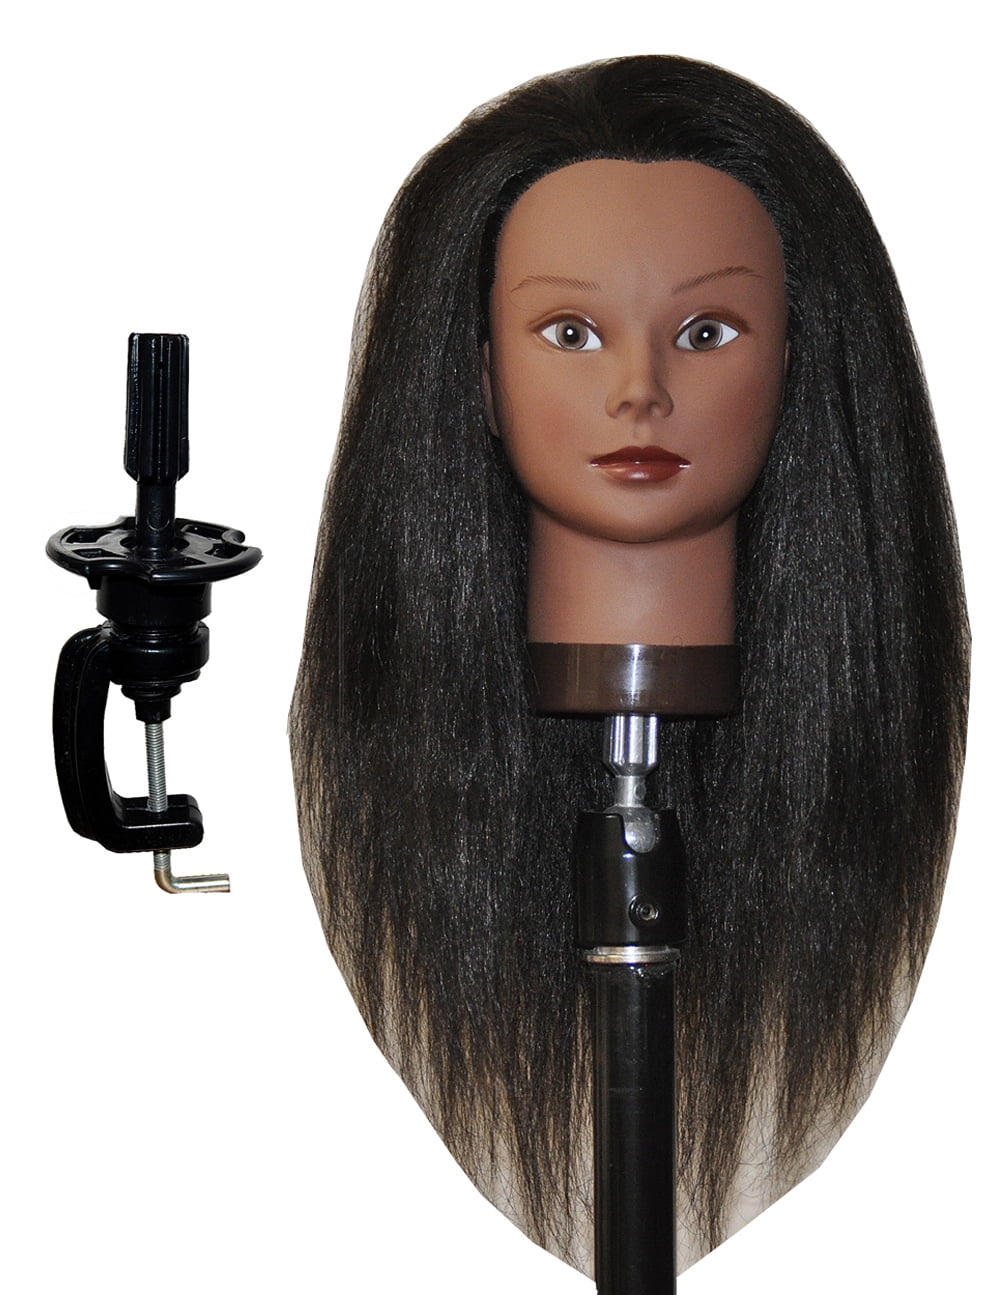 Mannequin Head with 100% Human Hair, MYSWEETY 18 Real Hair Manikin Doll  Head for Hair Styling, Cosmetology Mannequin Hairdressing Practice Training